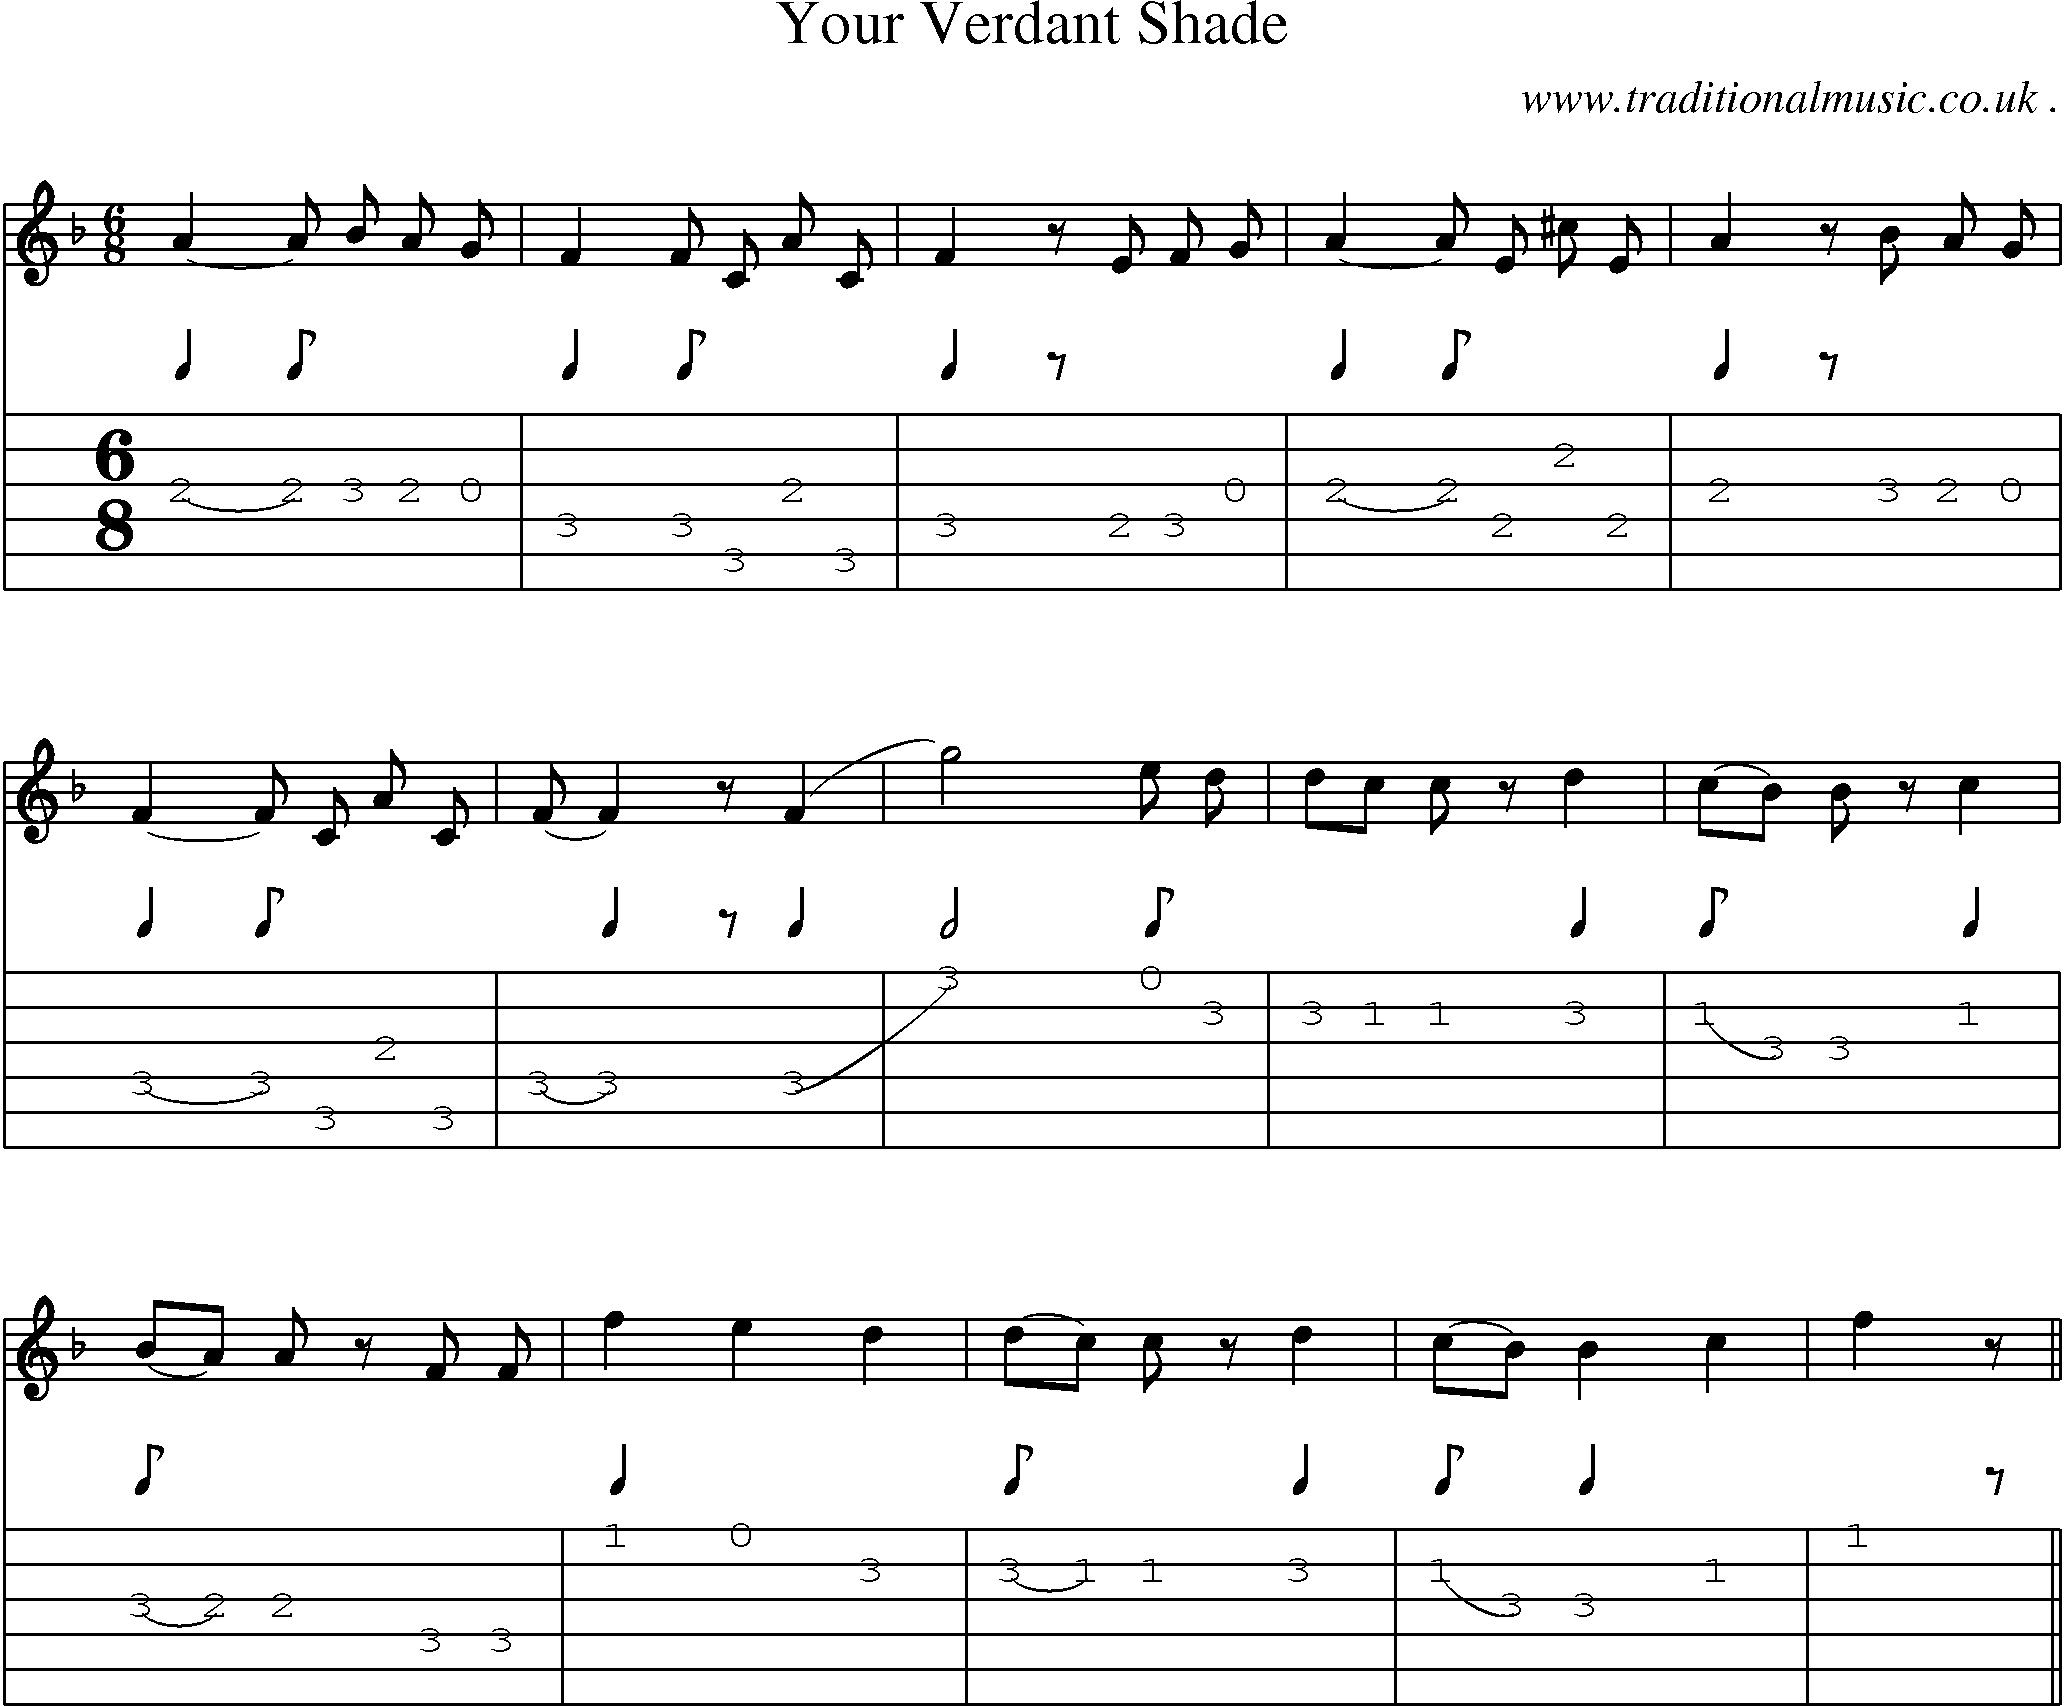 Sheet-Music and Guitar Tabs for Your Verdant Shade